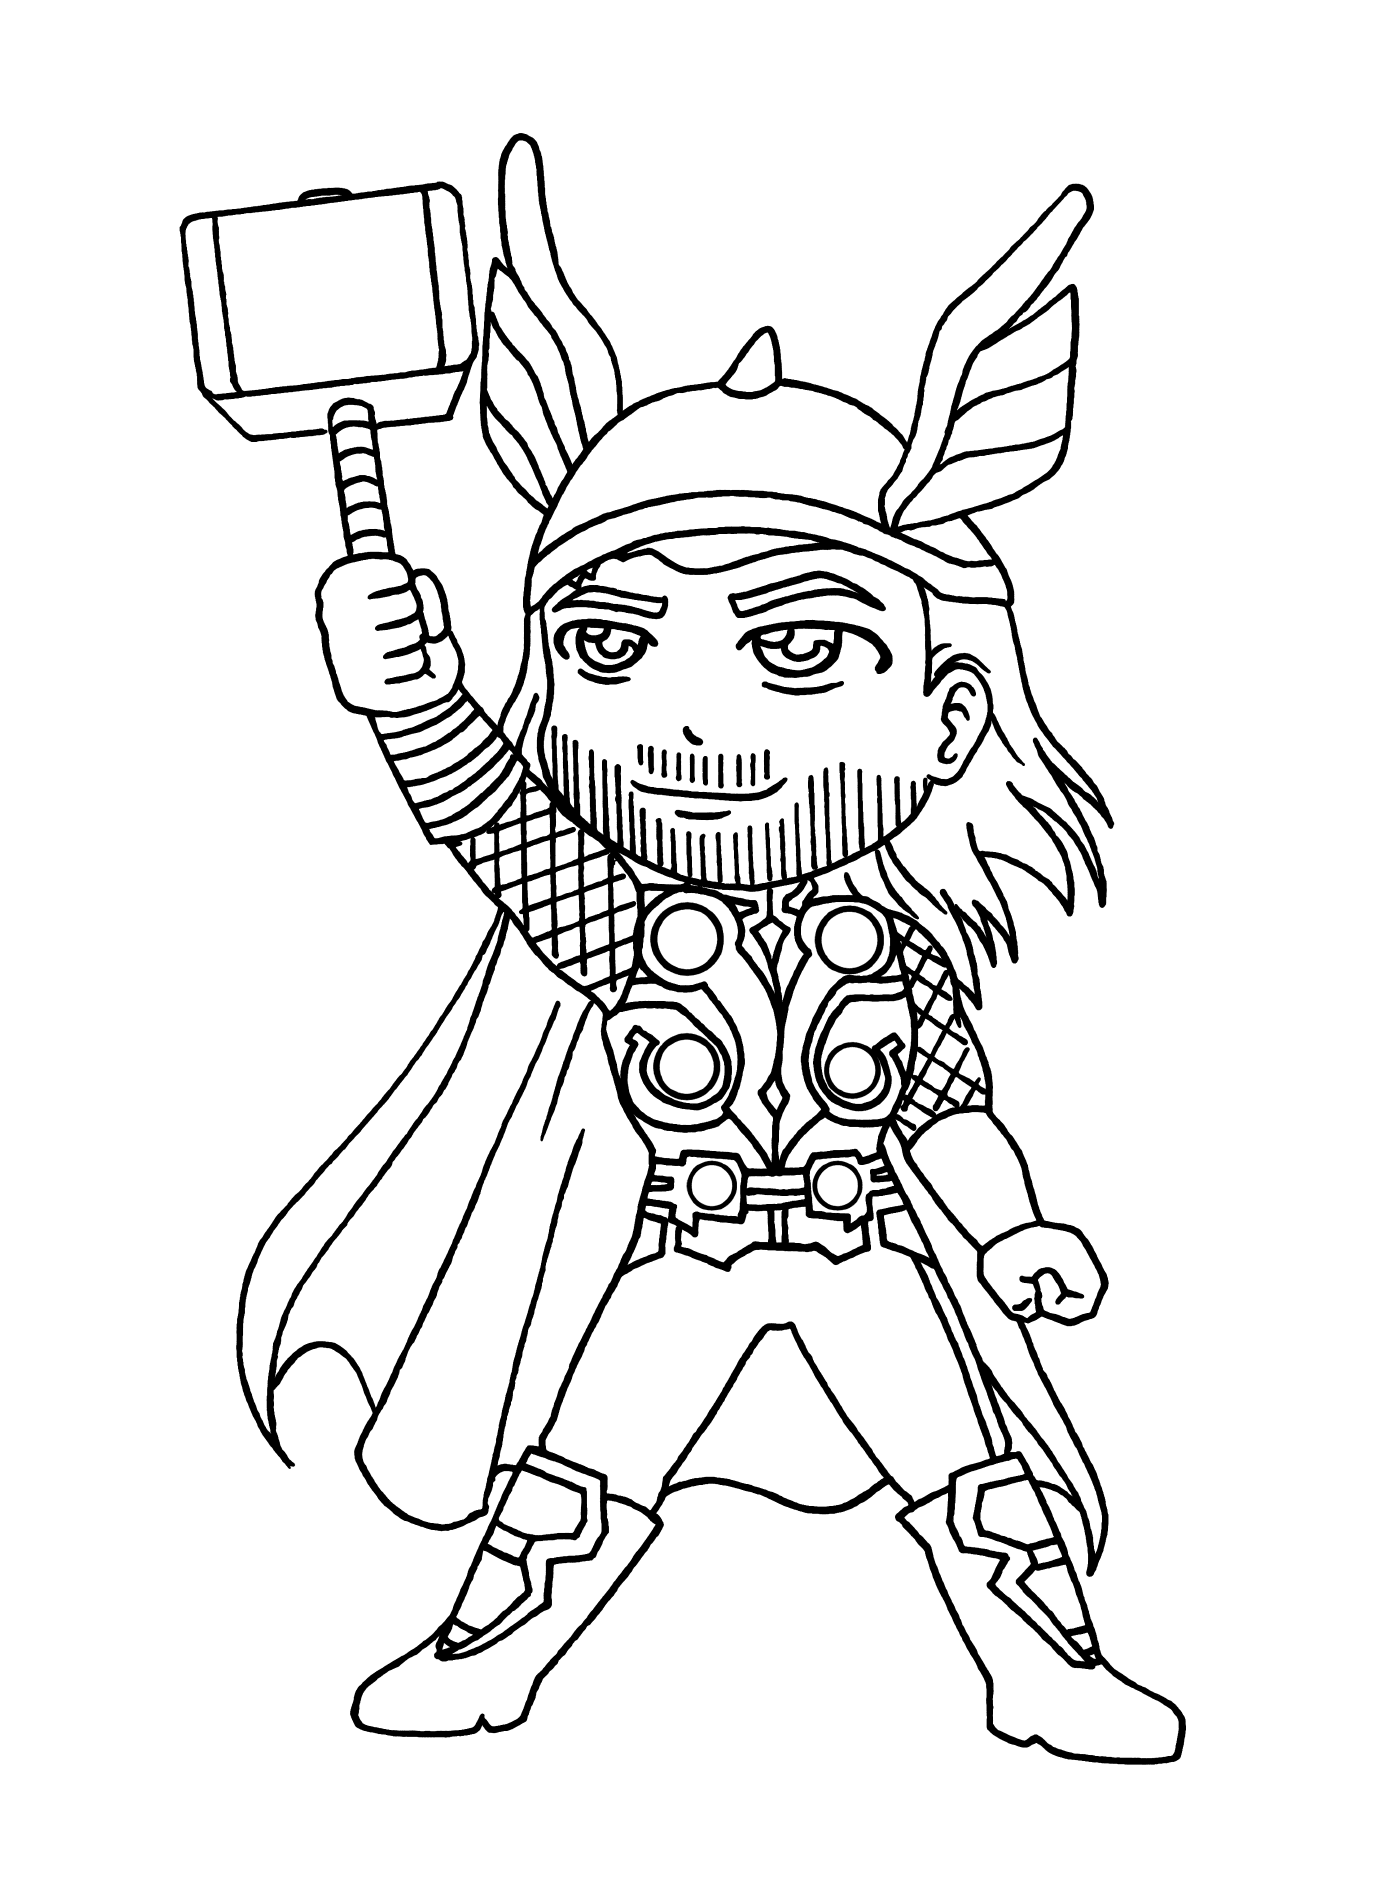  Thor, the mighty god 